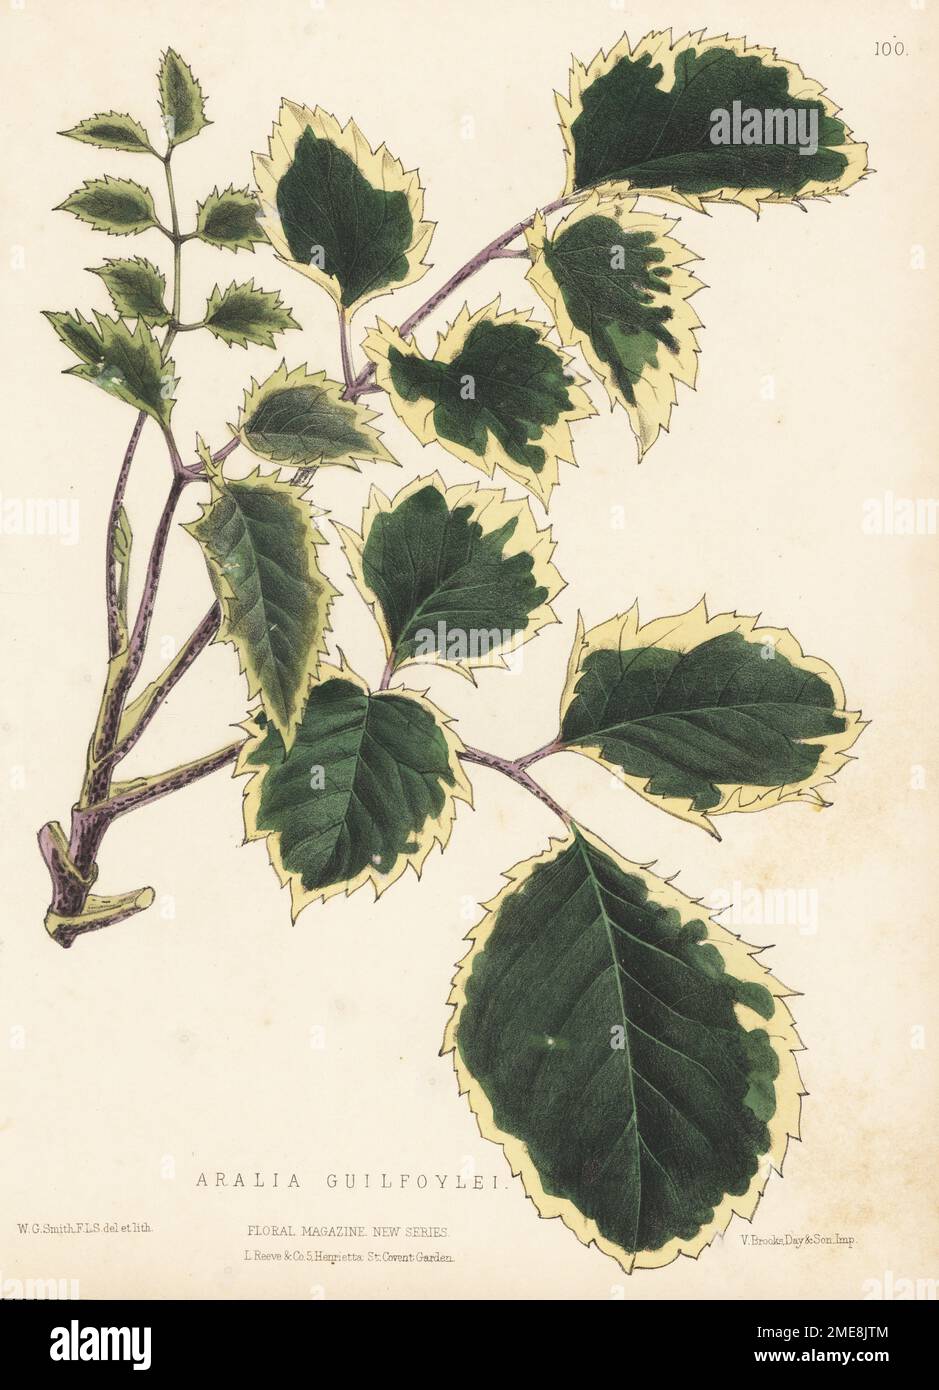 Geranium aralia or wild coffee, evergreen shrub native to the tropics, Polyscias guilfoylei. Imported by William Bull nurseryman. As Aralia guilfoylei. Handcolored botanical illustration drawn and lithographed by Worthington George Smith from Henry Honywood Dombrain's Floral Magazine, New Series, Volume 3, L. Reeve, London, 1874. Lithograph printed by Vincent Brooks, Day & Son. Stock Photo